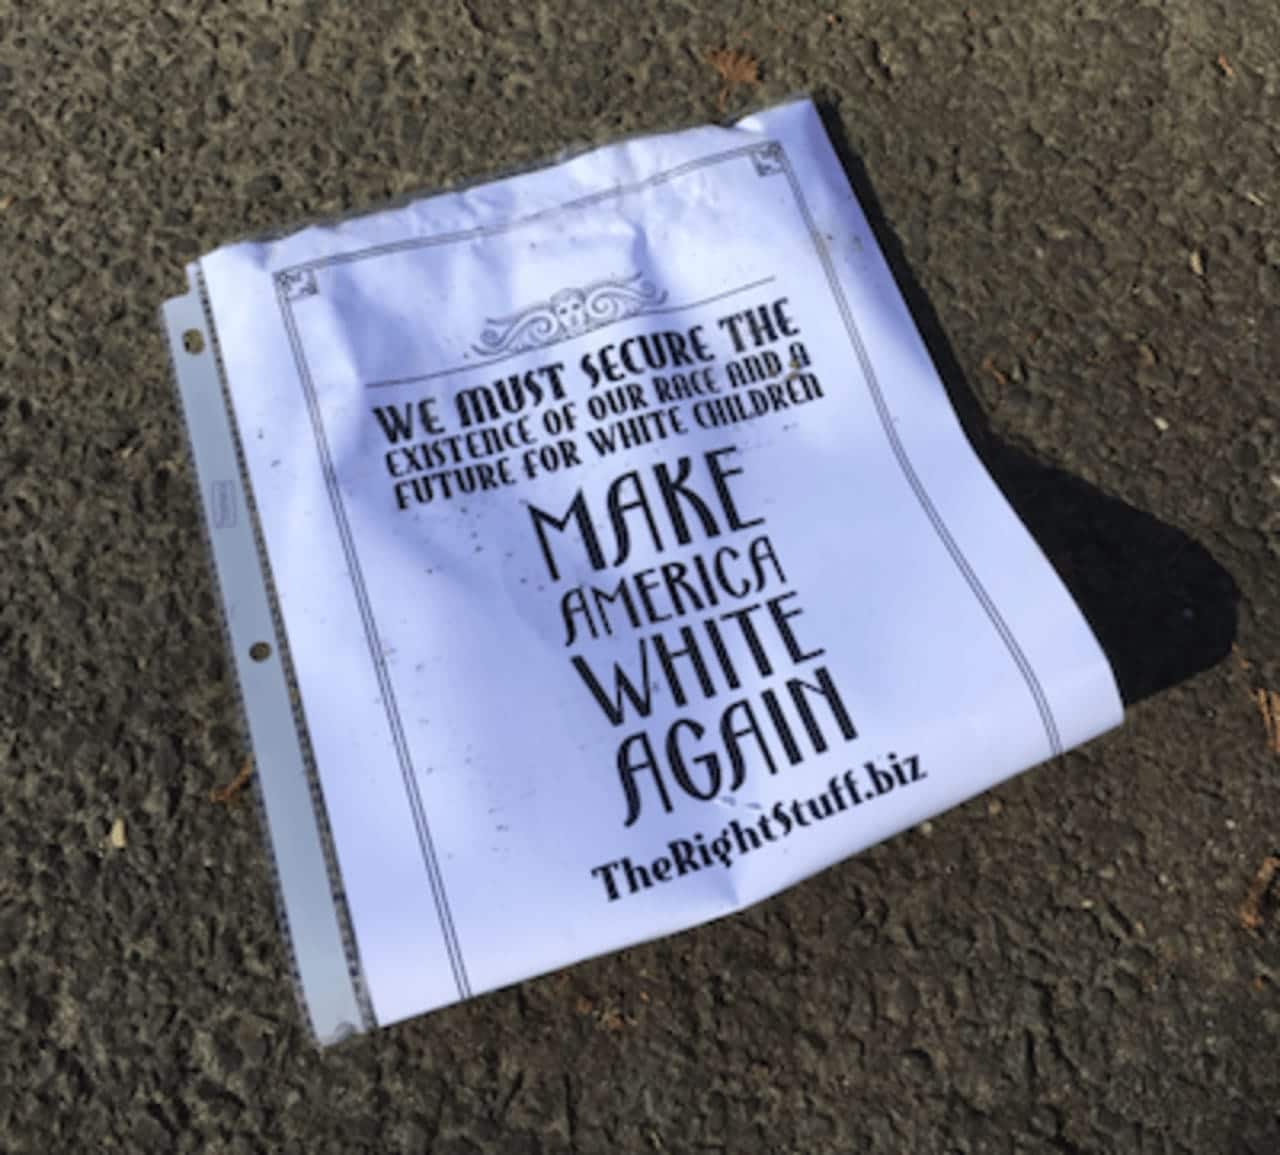 One of five white supremacist flyers found in driveways on Newtown Avenue Monday morning. Norwalk Police are investigating.